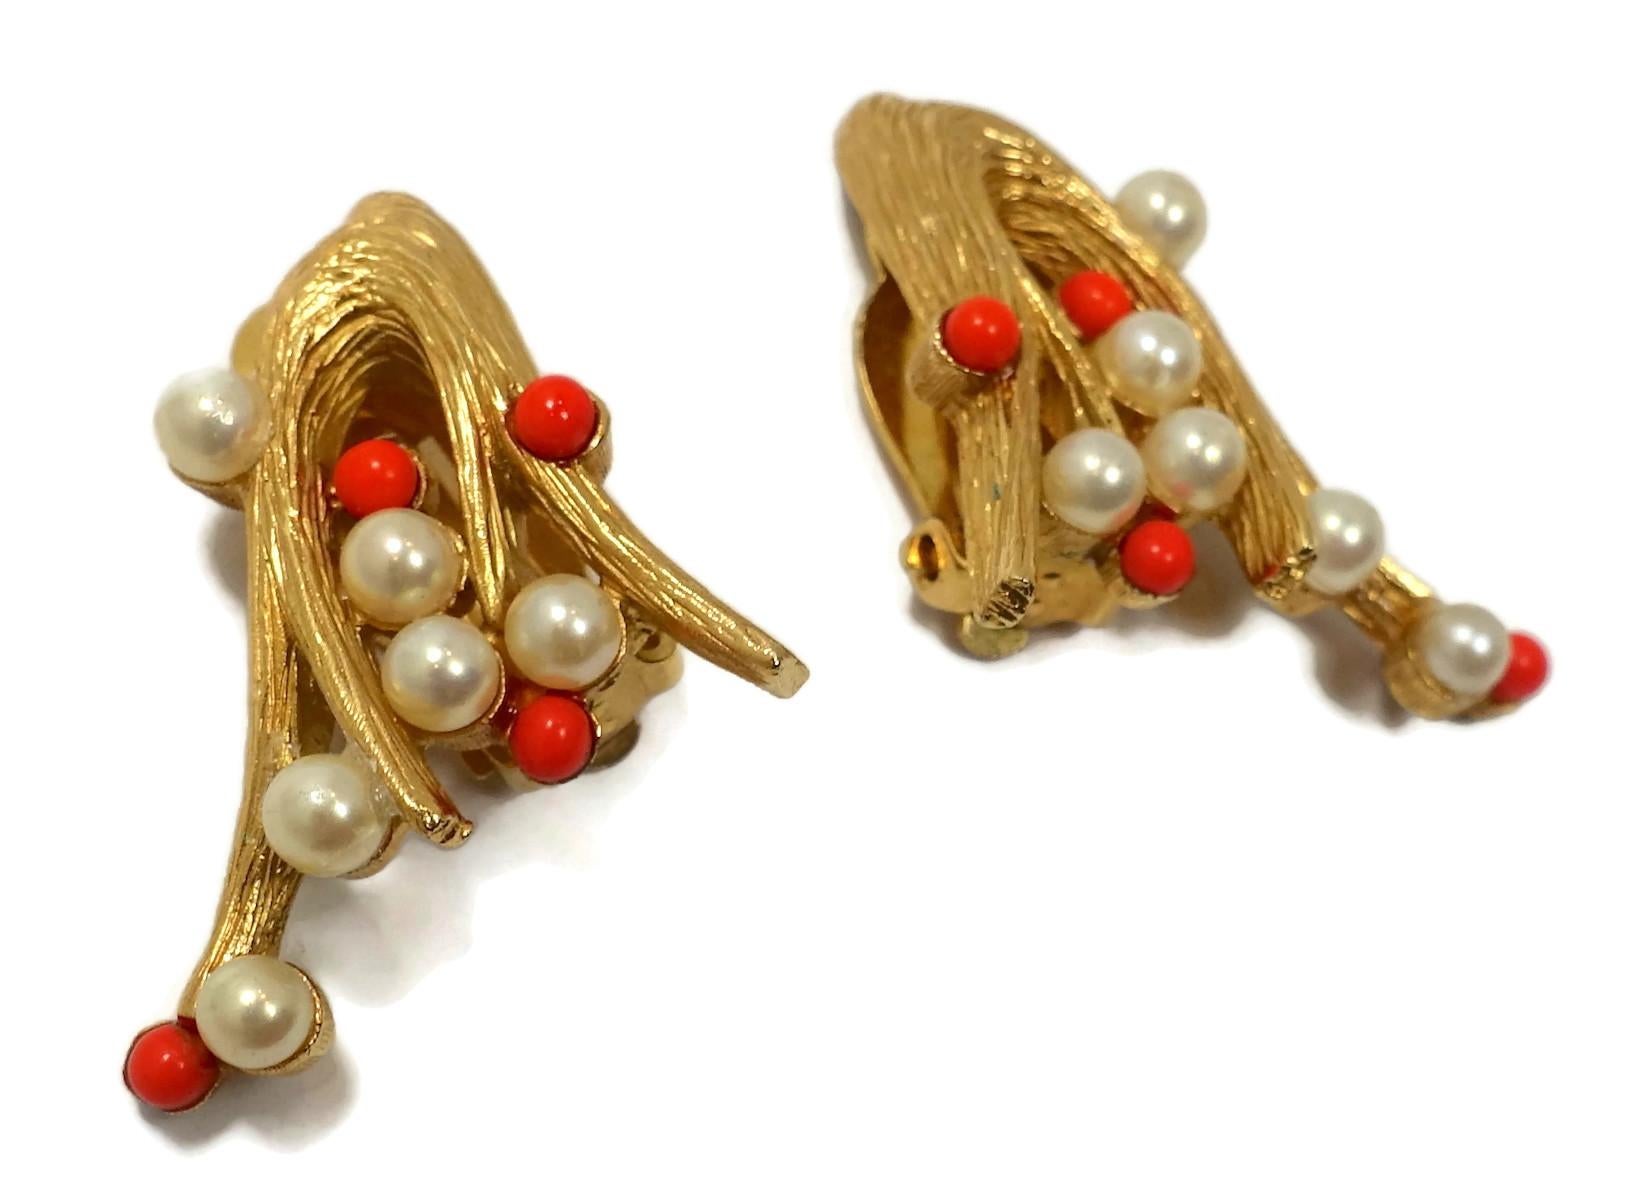 Vintage Signed Joseph Mazer Faux Pearl & Coral Bead Earrings For Sale 1